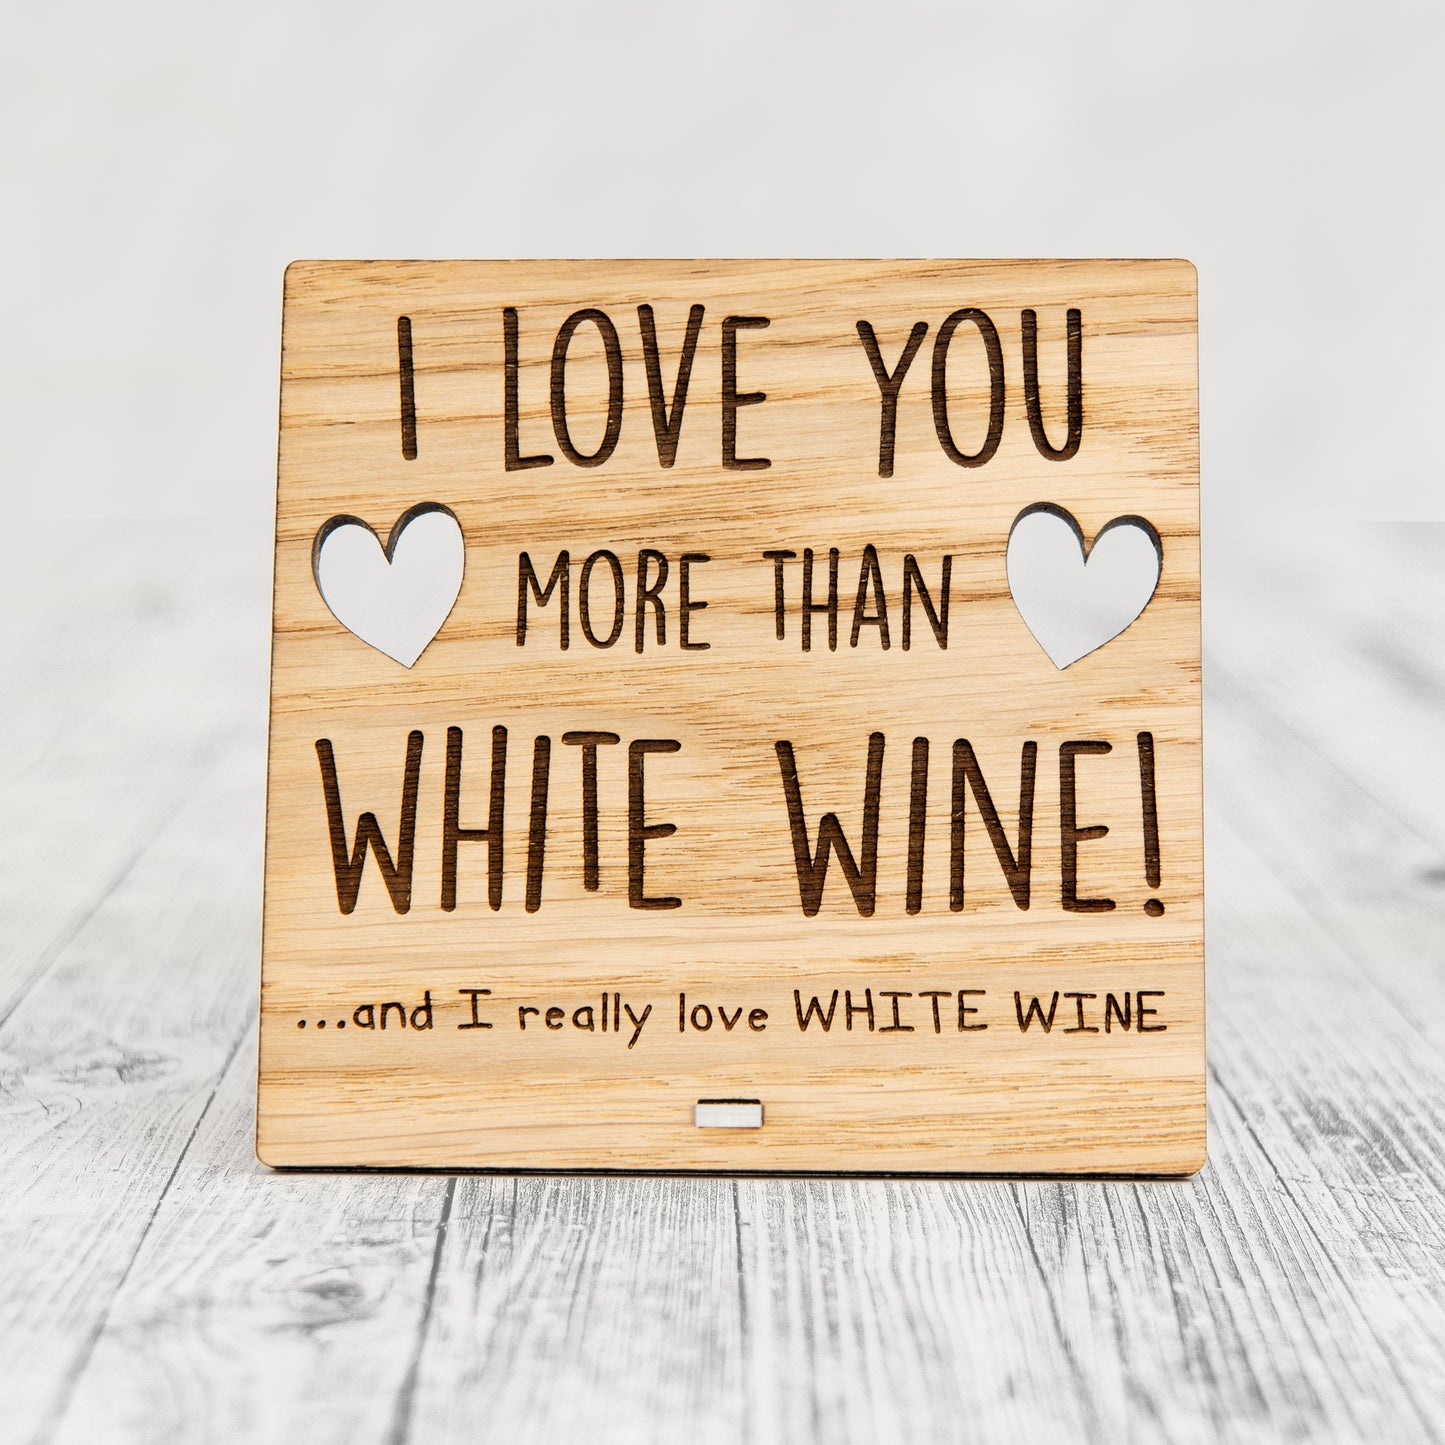 I Love You More Than WHITE WINE - Wooden Valentine's Day Plaque